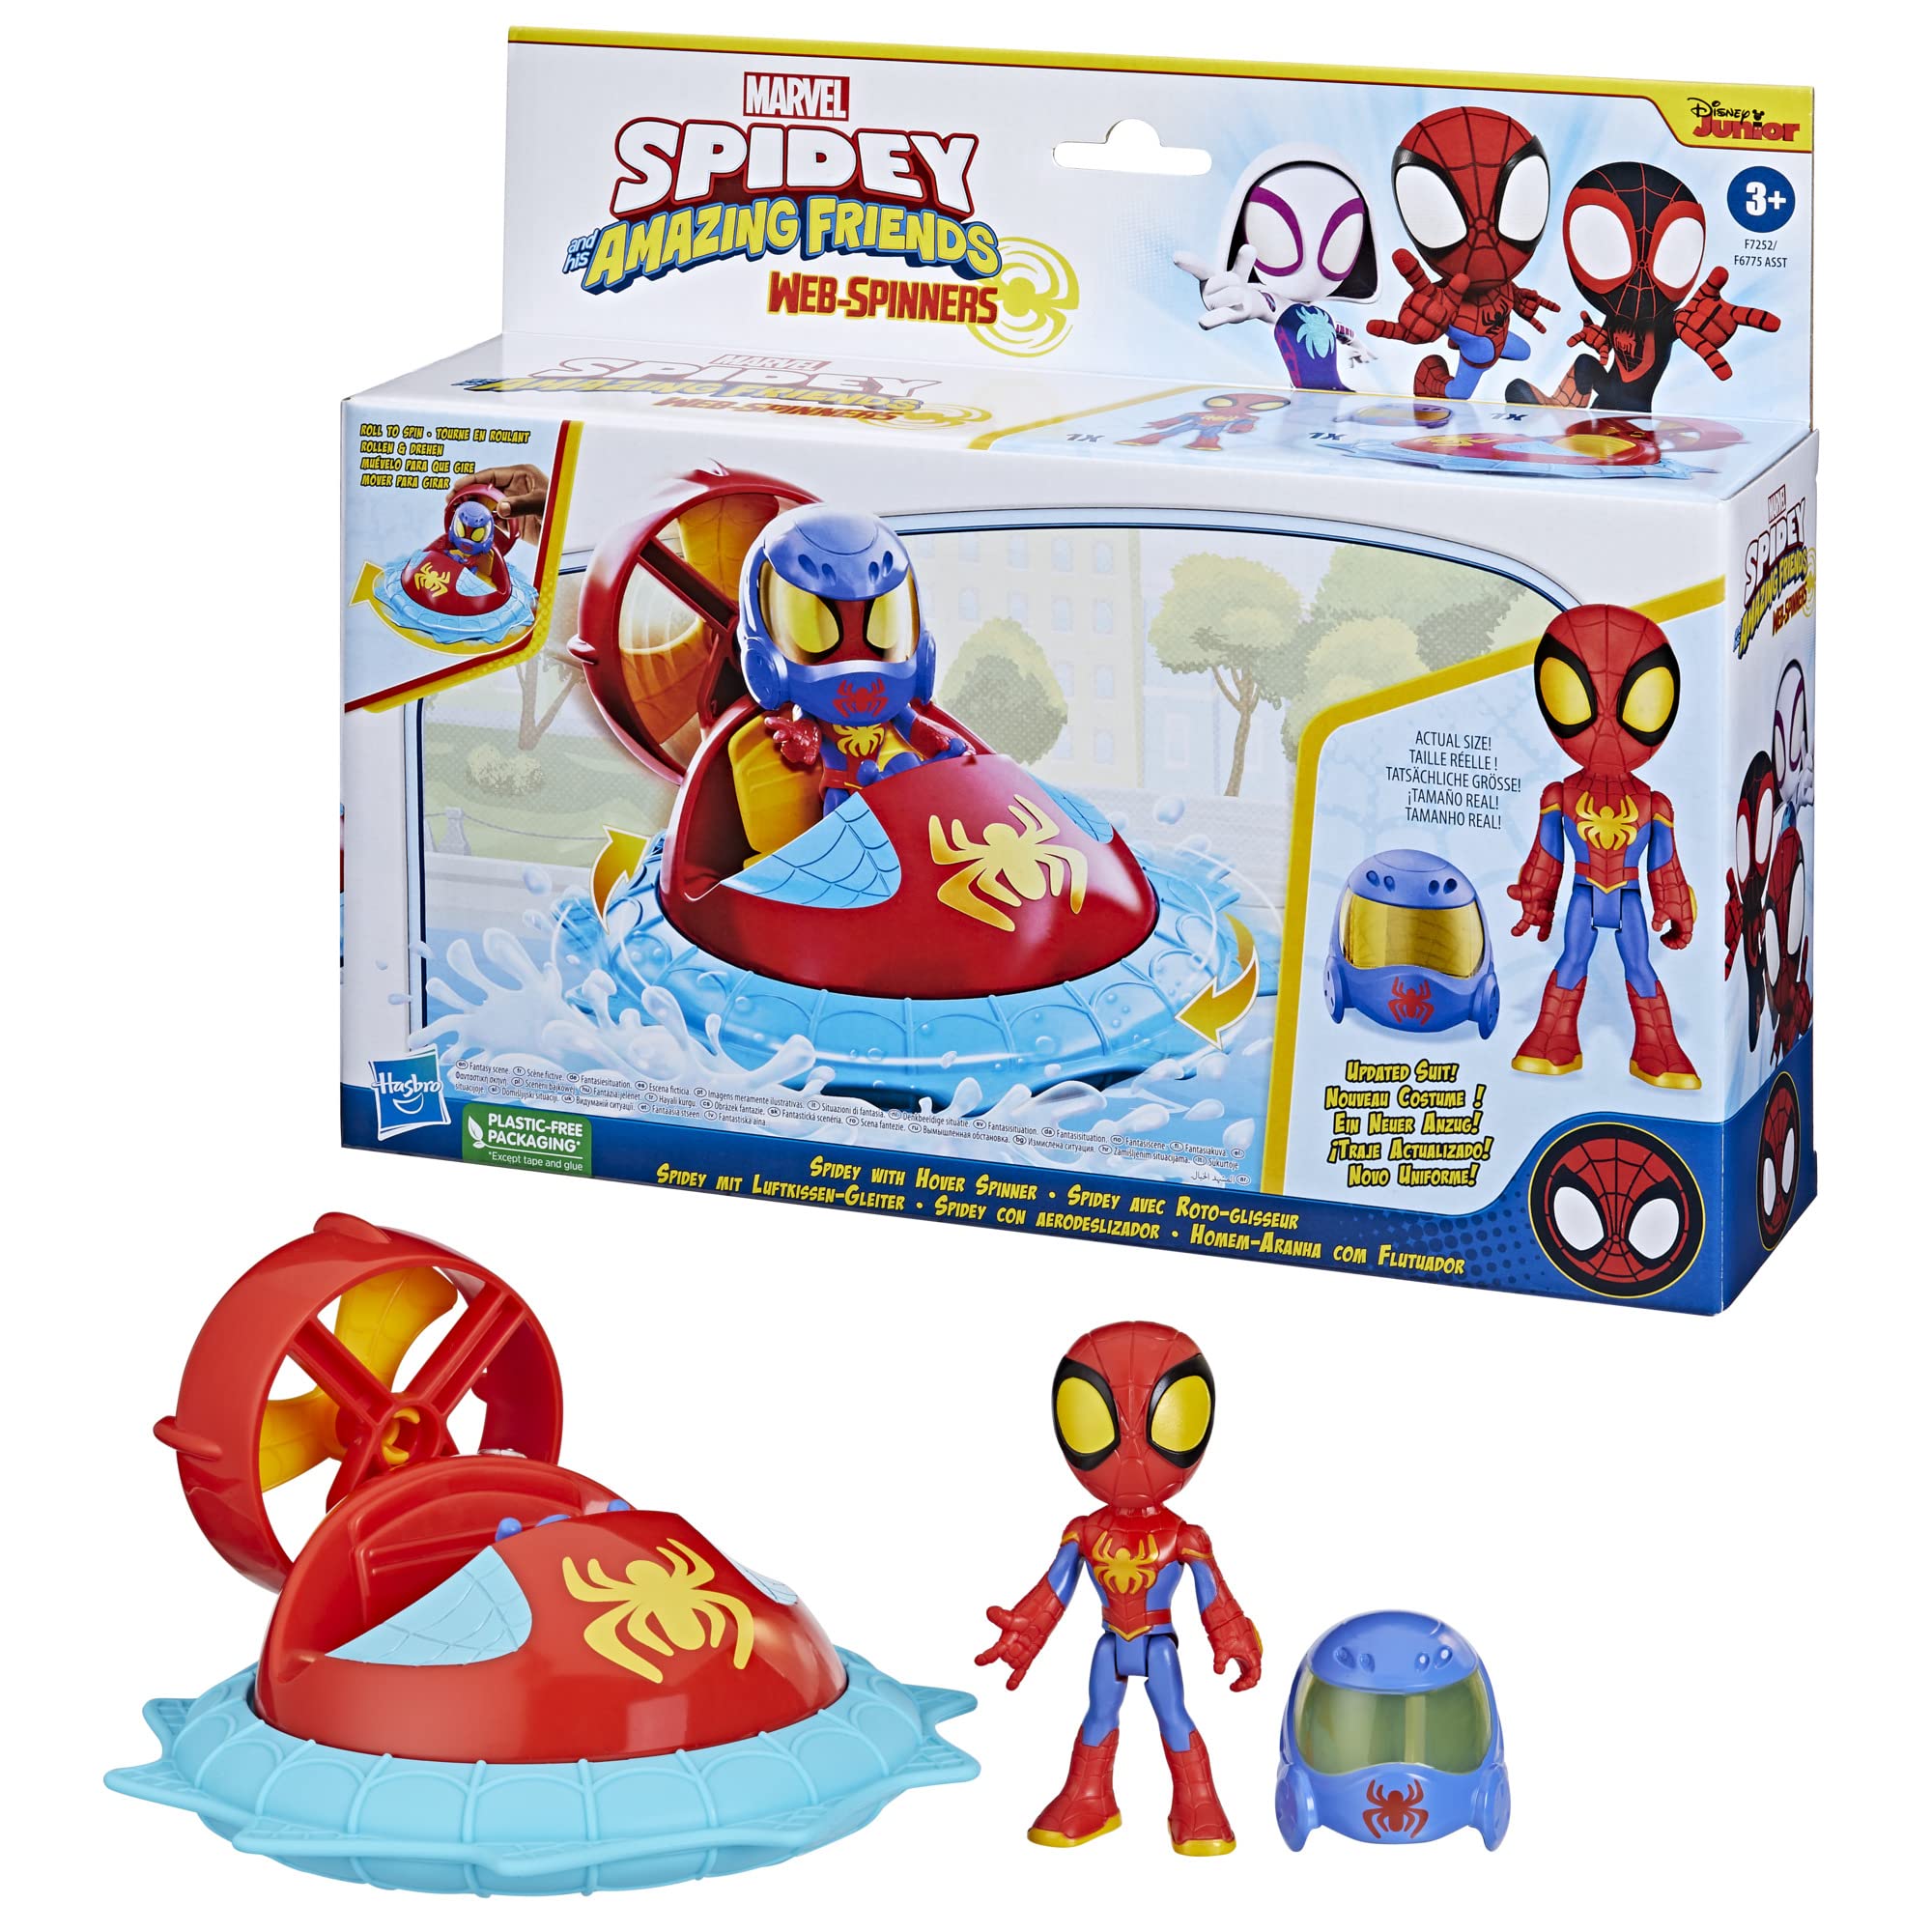 Spidey and His Amazing Friends Hasbro Marvel Web-Spinners Spidey with Hover Spinner,Car Playset with Vehicle,Figure,and Accessory,Toy Cars for Kids 3 and Up